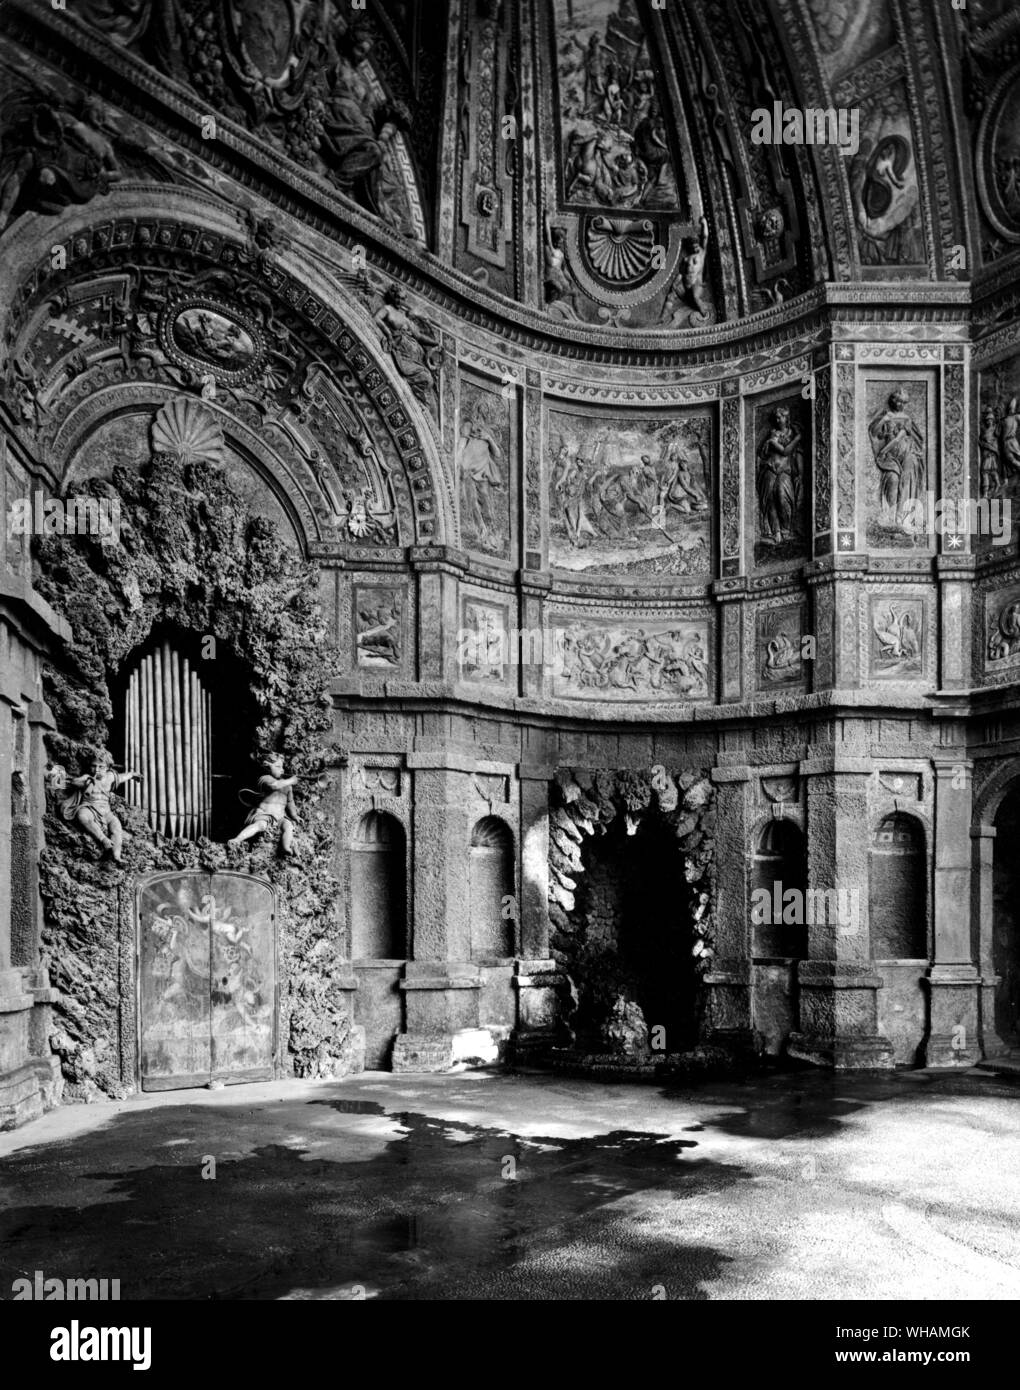 The water organ of Clement VIII in the Quirinal Palace. The dark archway in centre leads to the Forge of Vulcan, a cave in which life sized automata were formerly worked by water power. The organ has been silent for many years Stock Photo